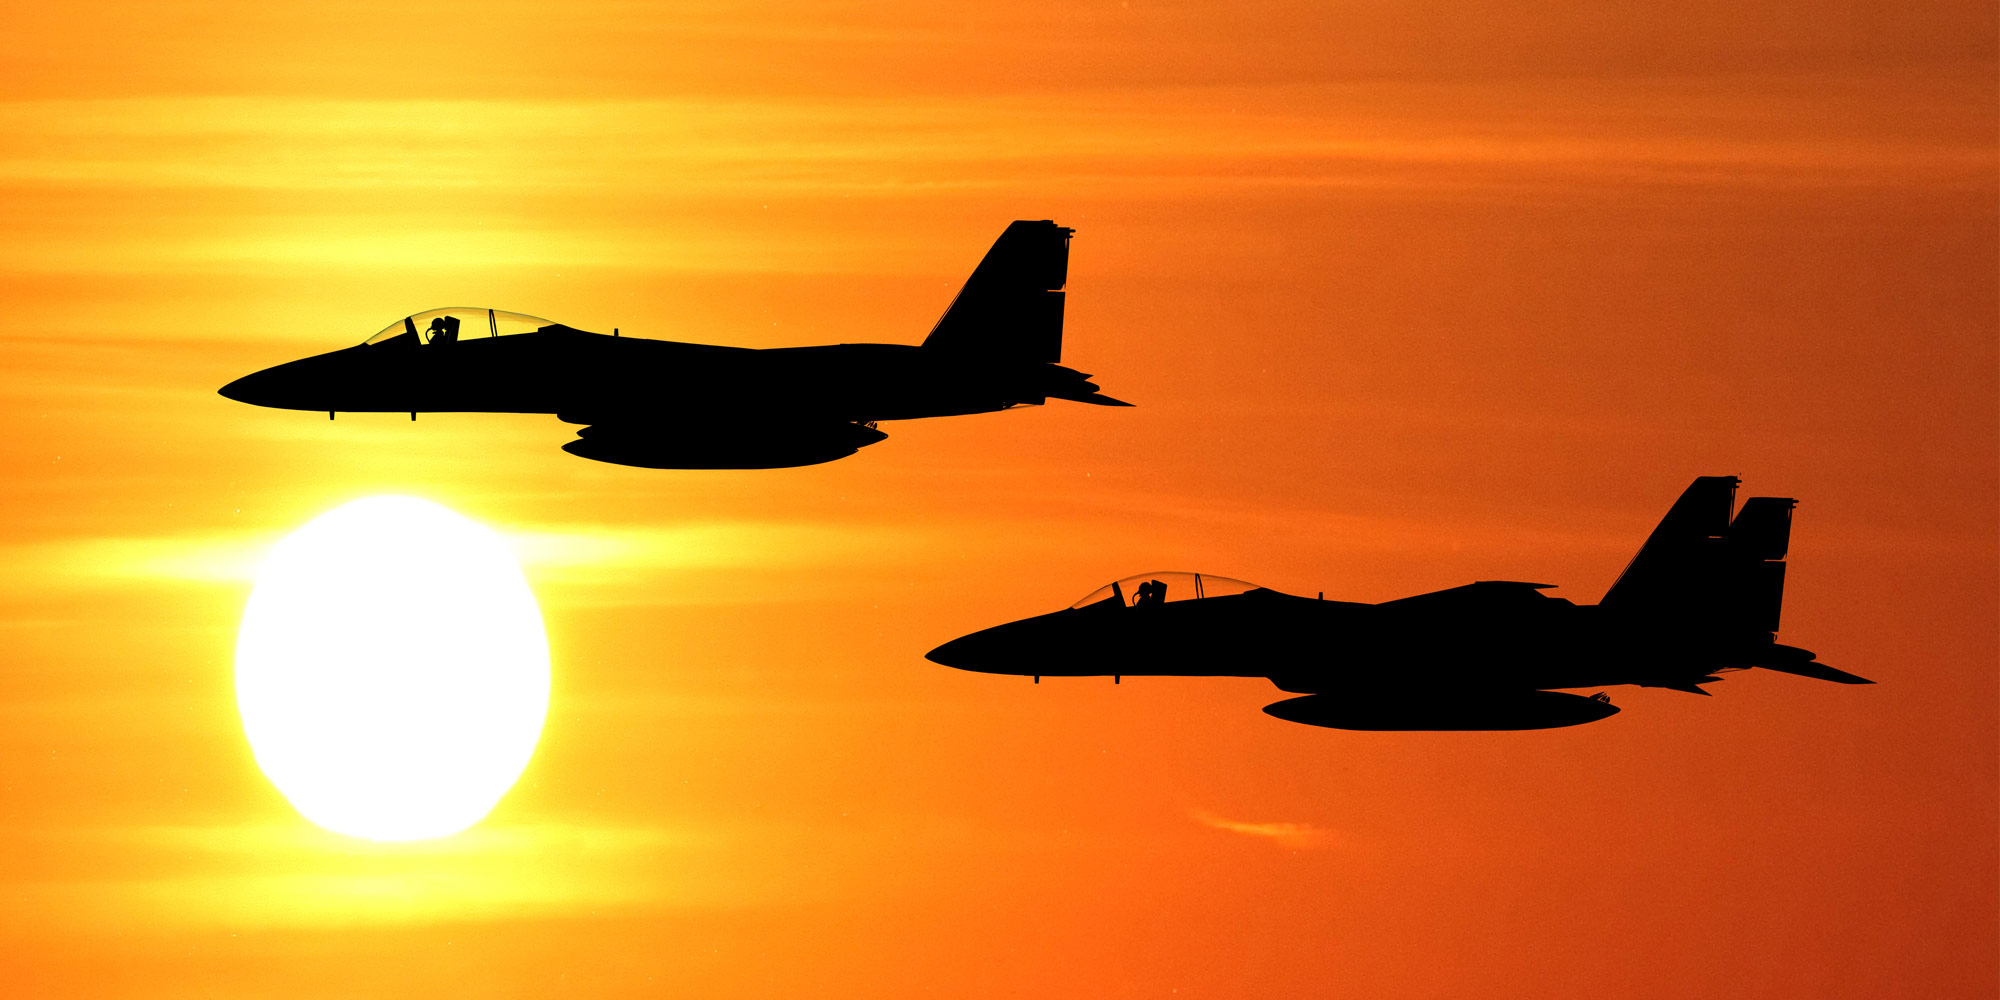 silhouette of two military jets in red sky